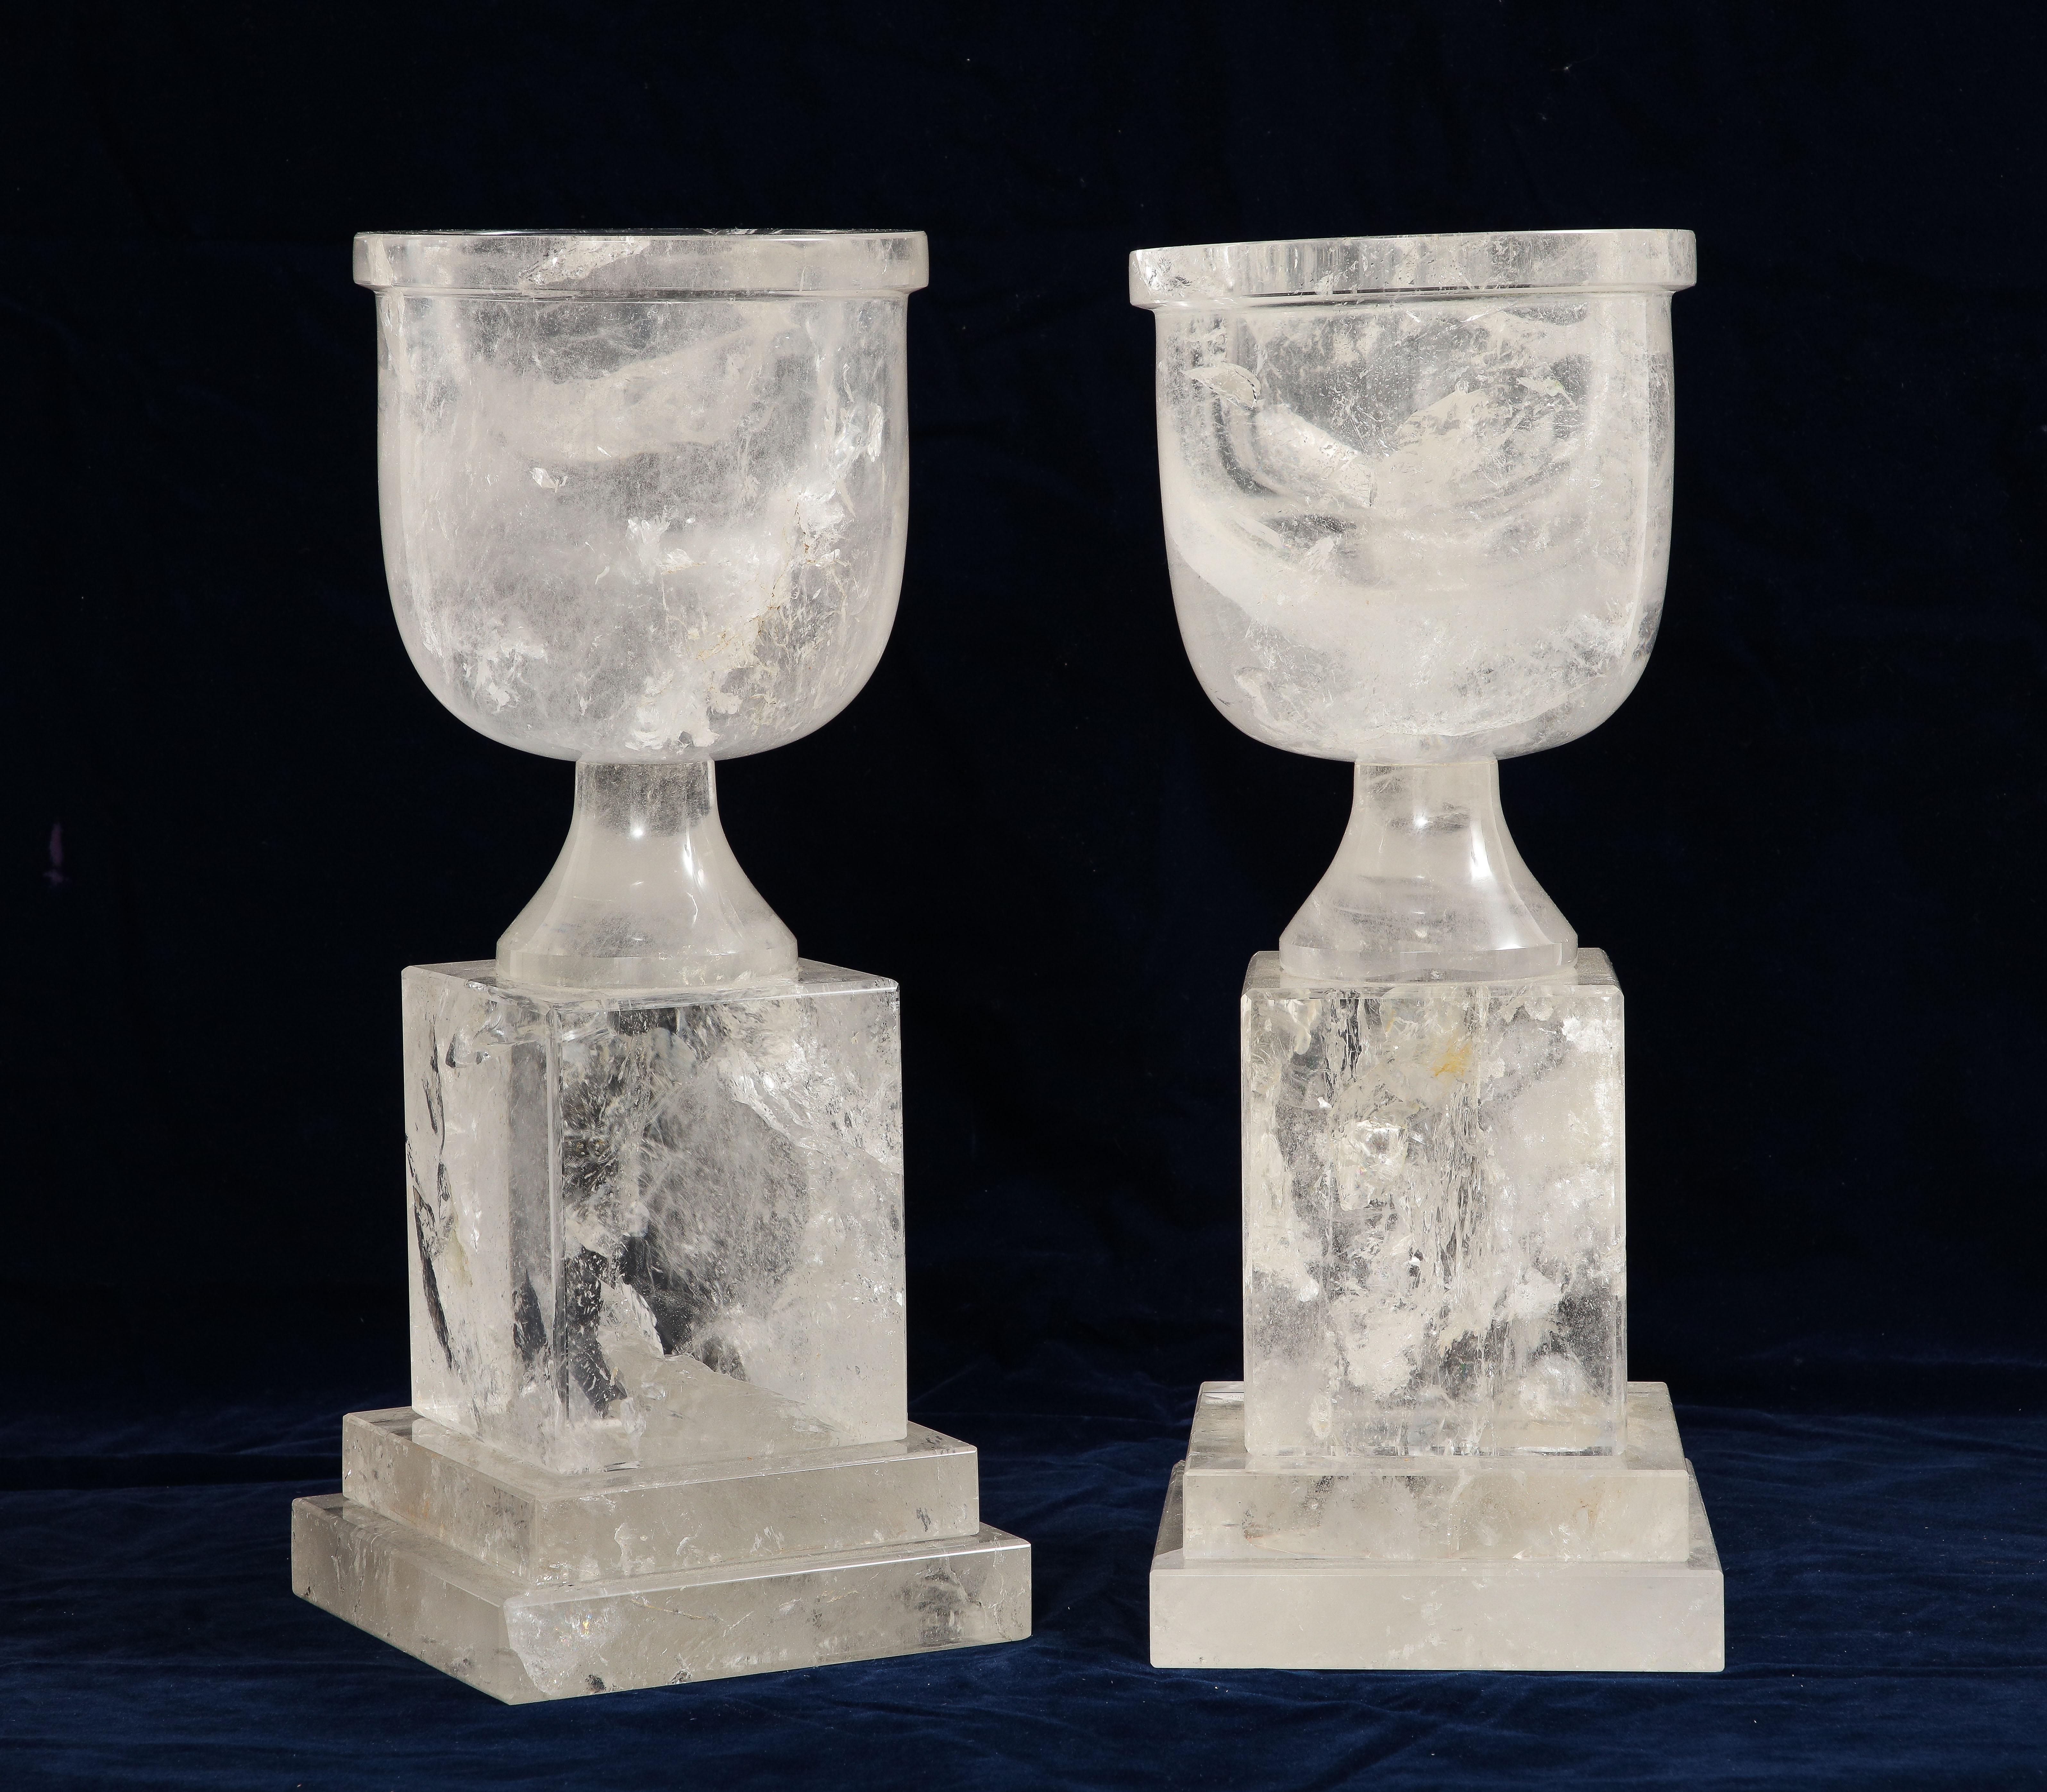 A Pair of Mid-Century Modern French Hand-Carved and Hand-Polished Rock Crystal Vases.  This pair of mid-century modern French vases is a stunning example of hand-carved and hand-polished rock crystal. The vases feature a square step-up base pedestal